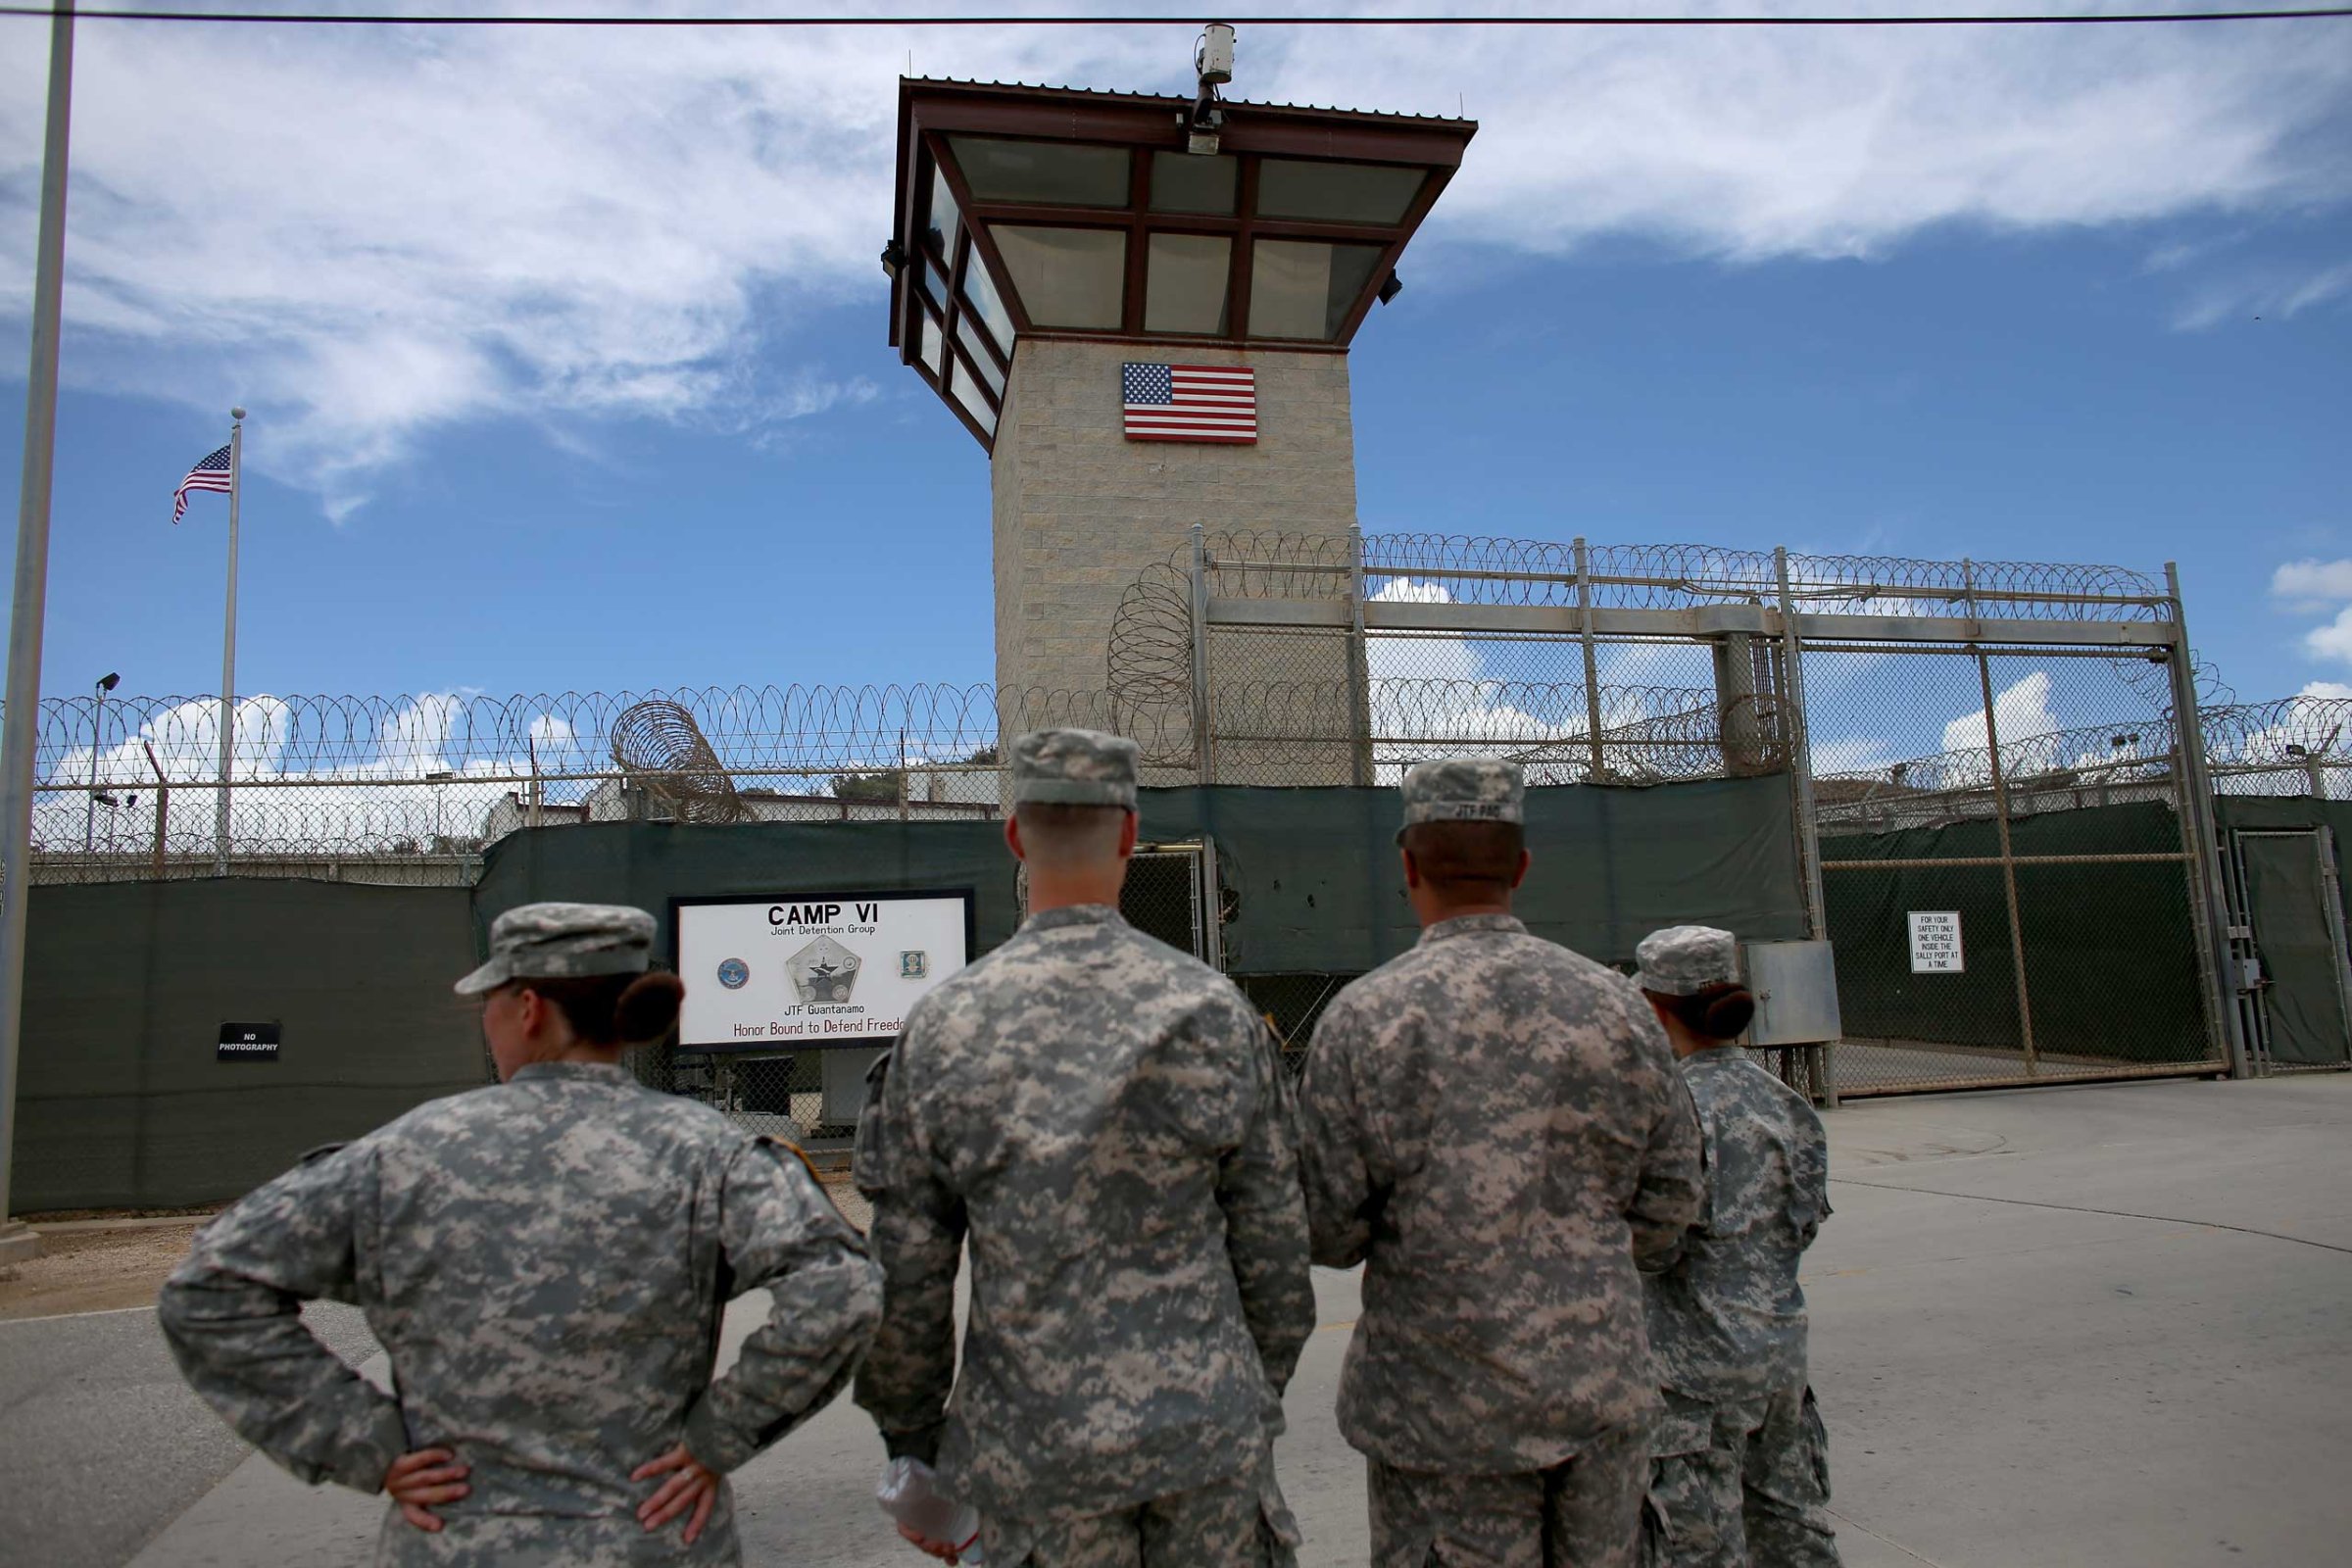 Military officers stand at the entrance to Camp VI and V at the U.S. military prison for 'enemy combatants' on June 25, 2013 in Guantanamo Bay, Cuba.